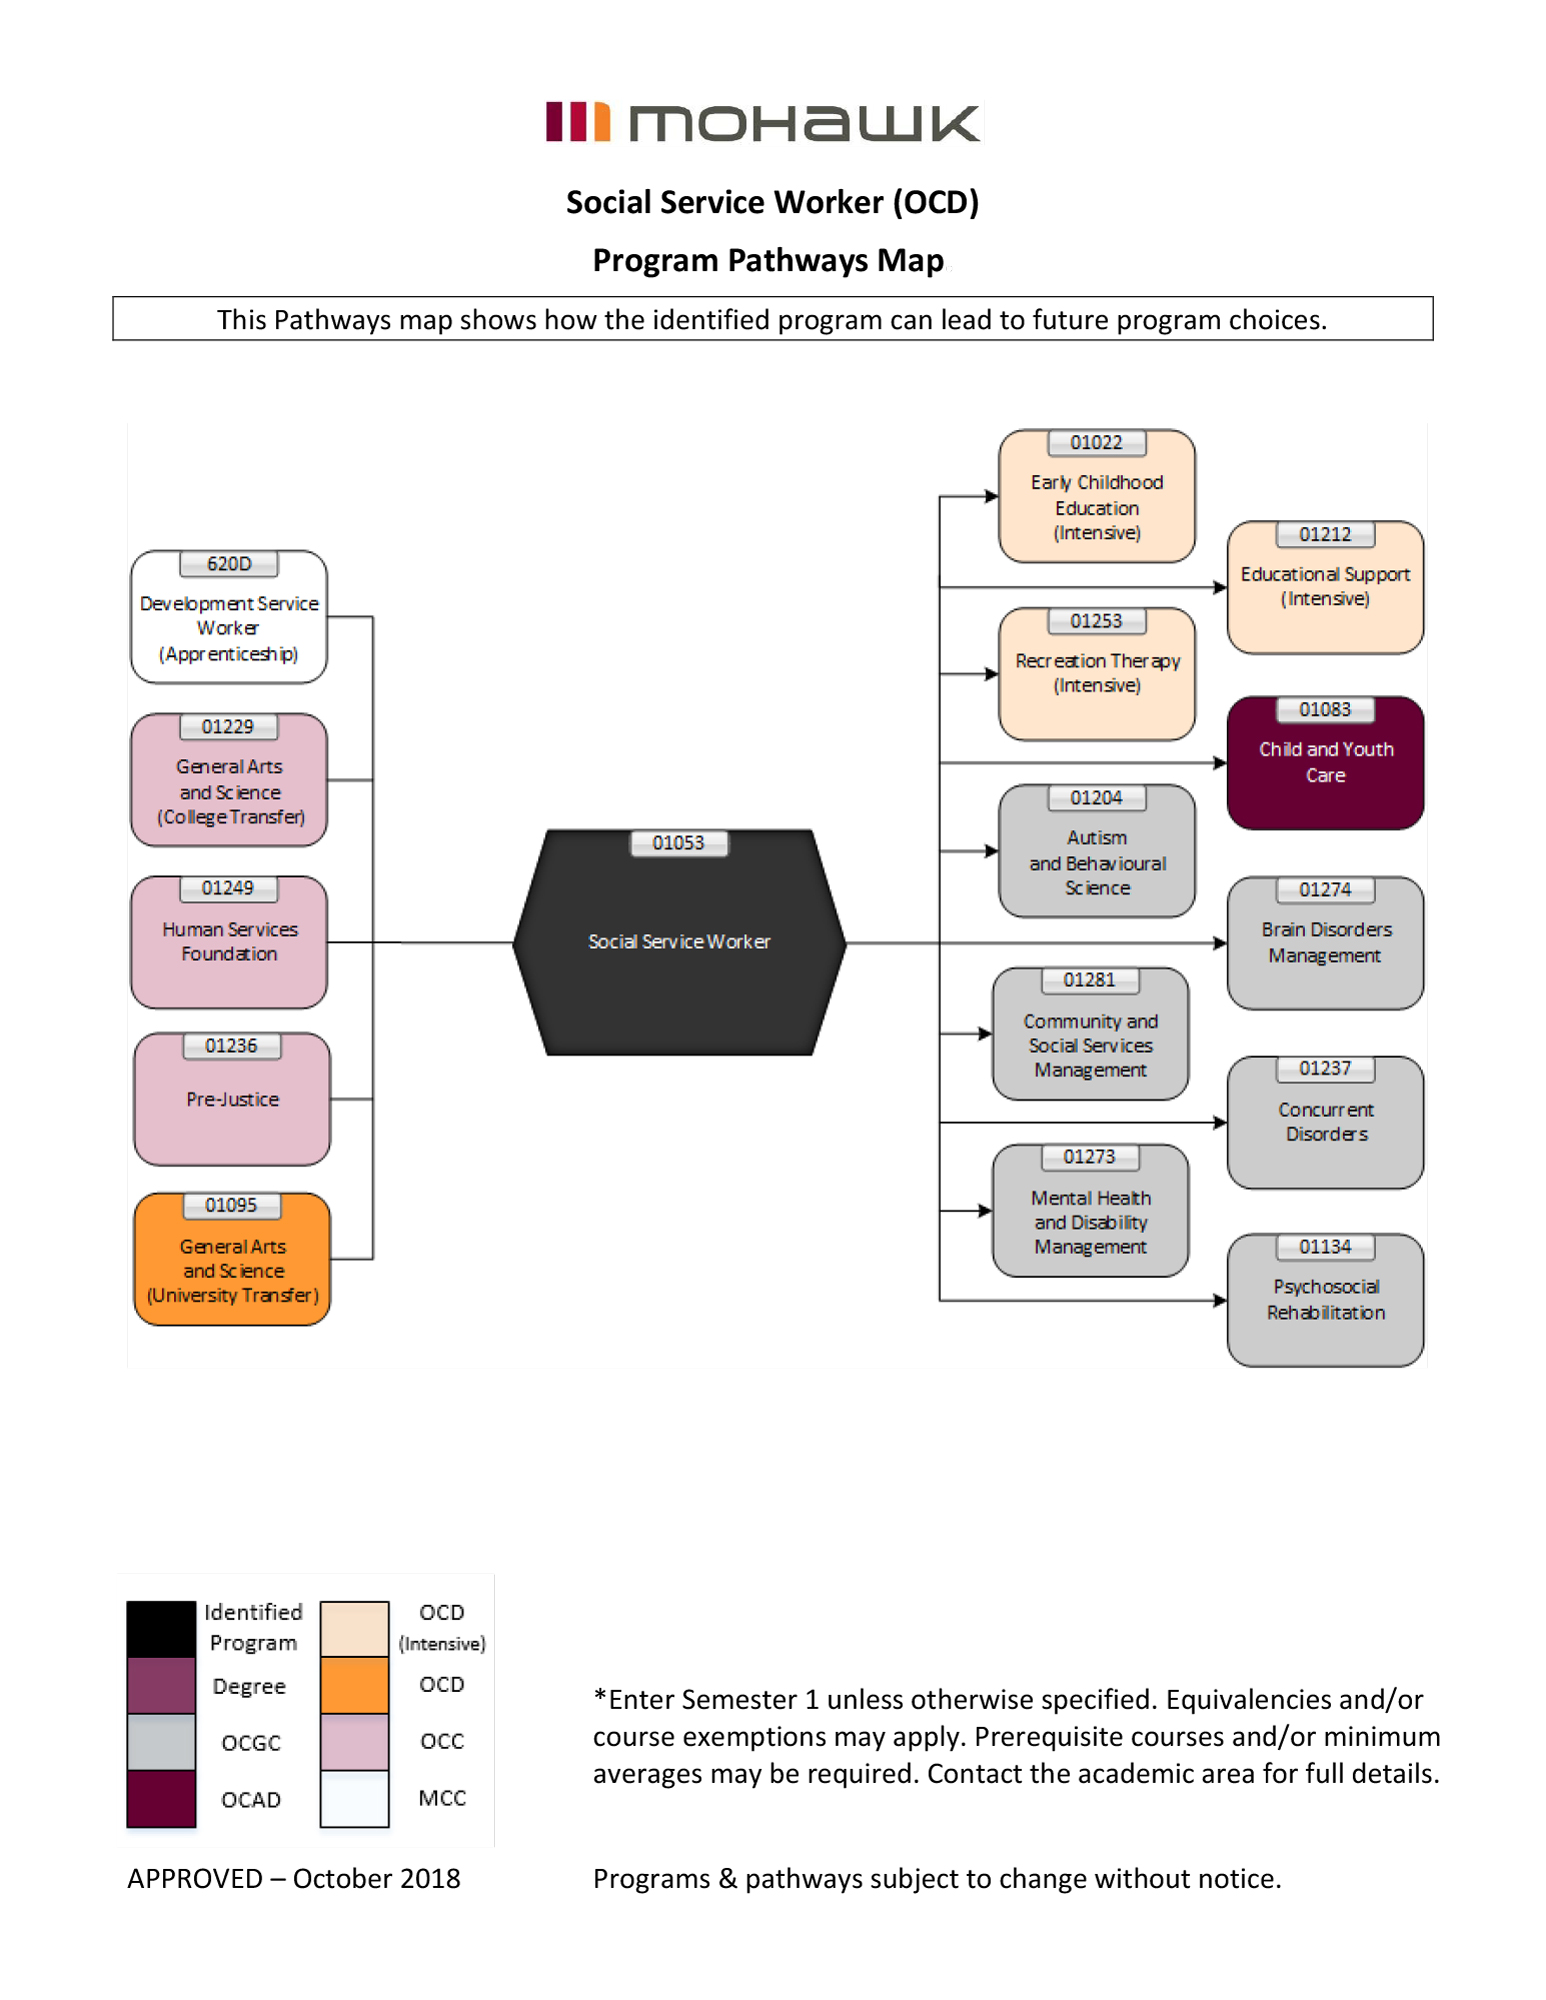 Social Service Worker pathways map